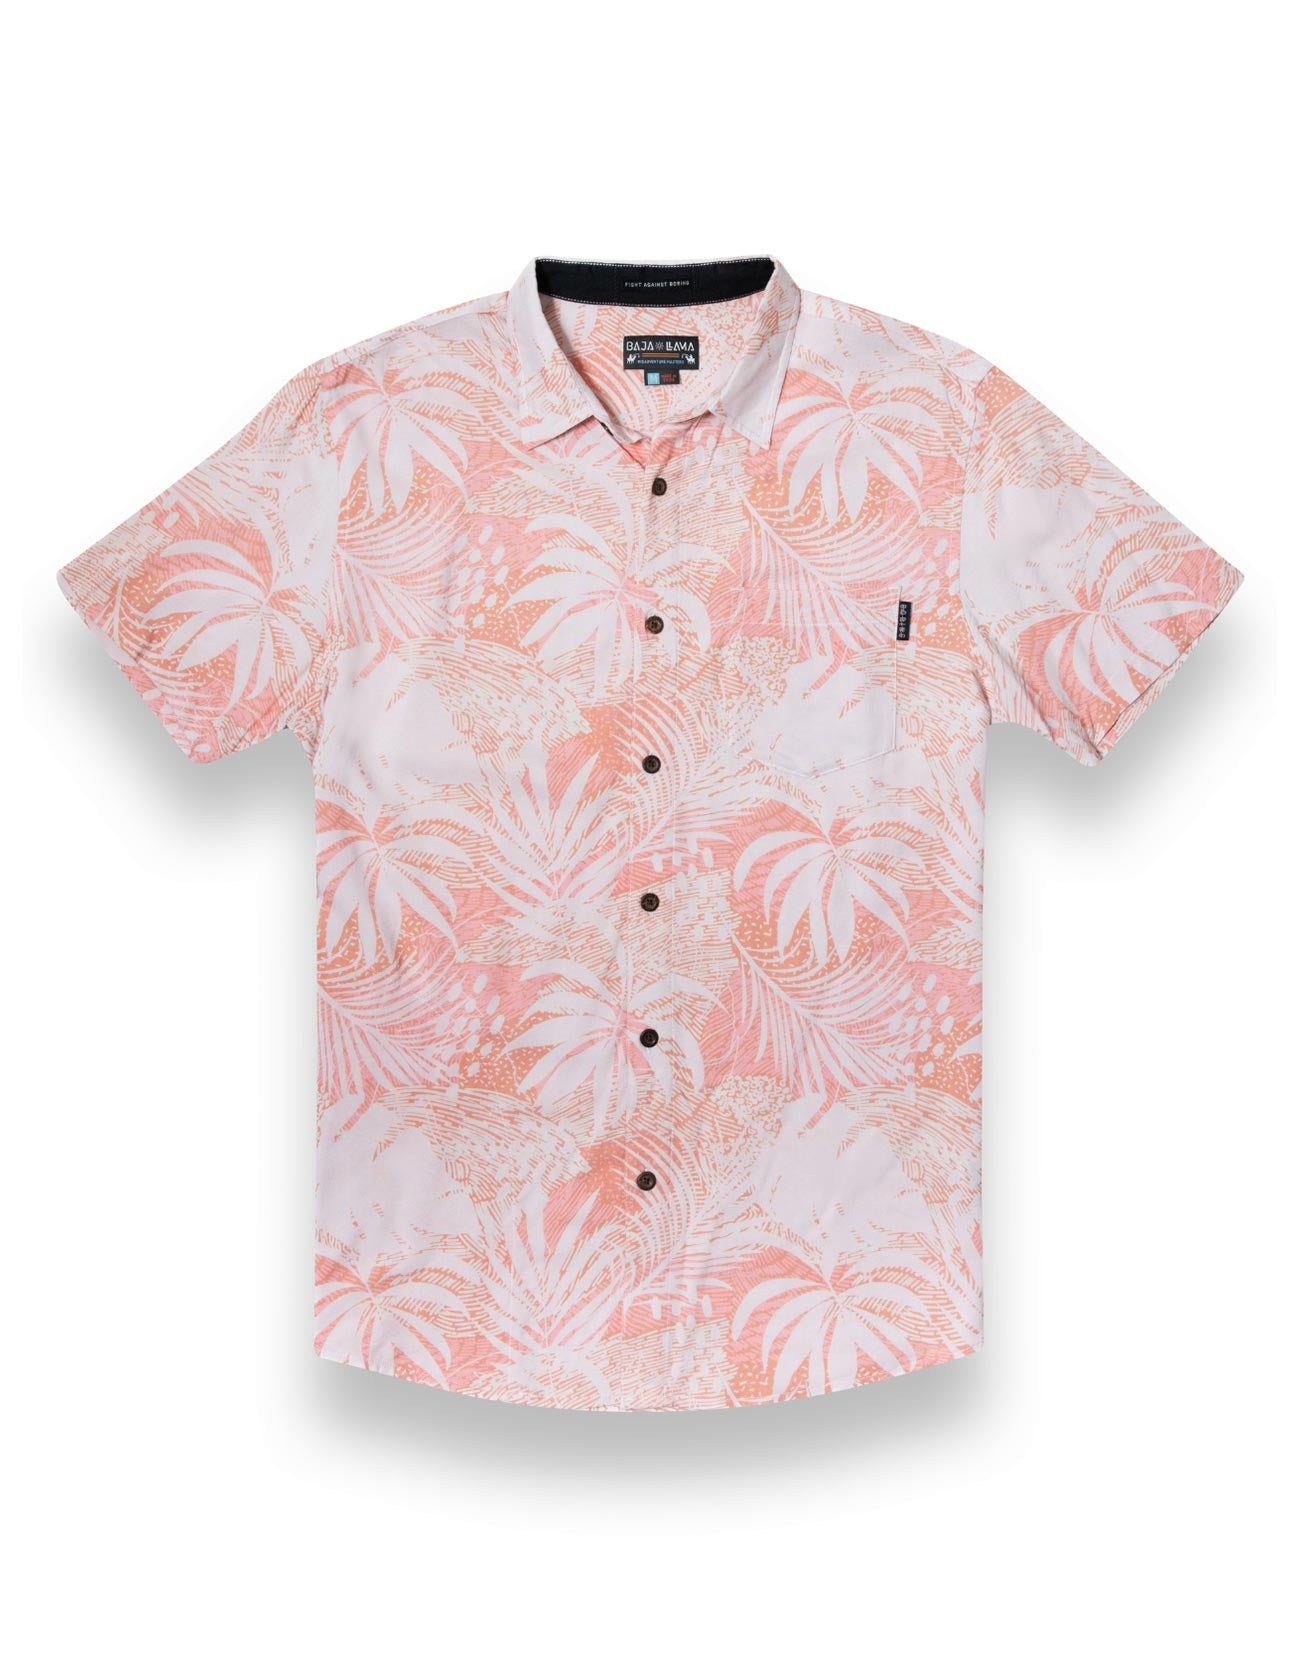 Peach colored button up shirt with tropical palm leaves print 